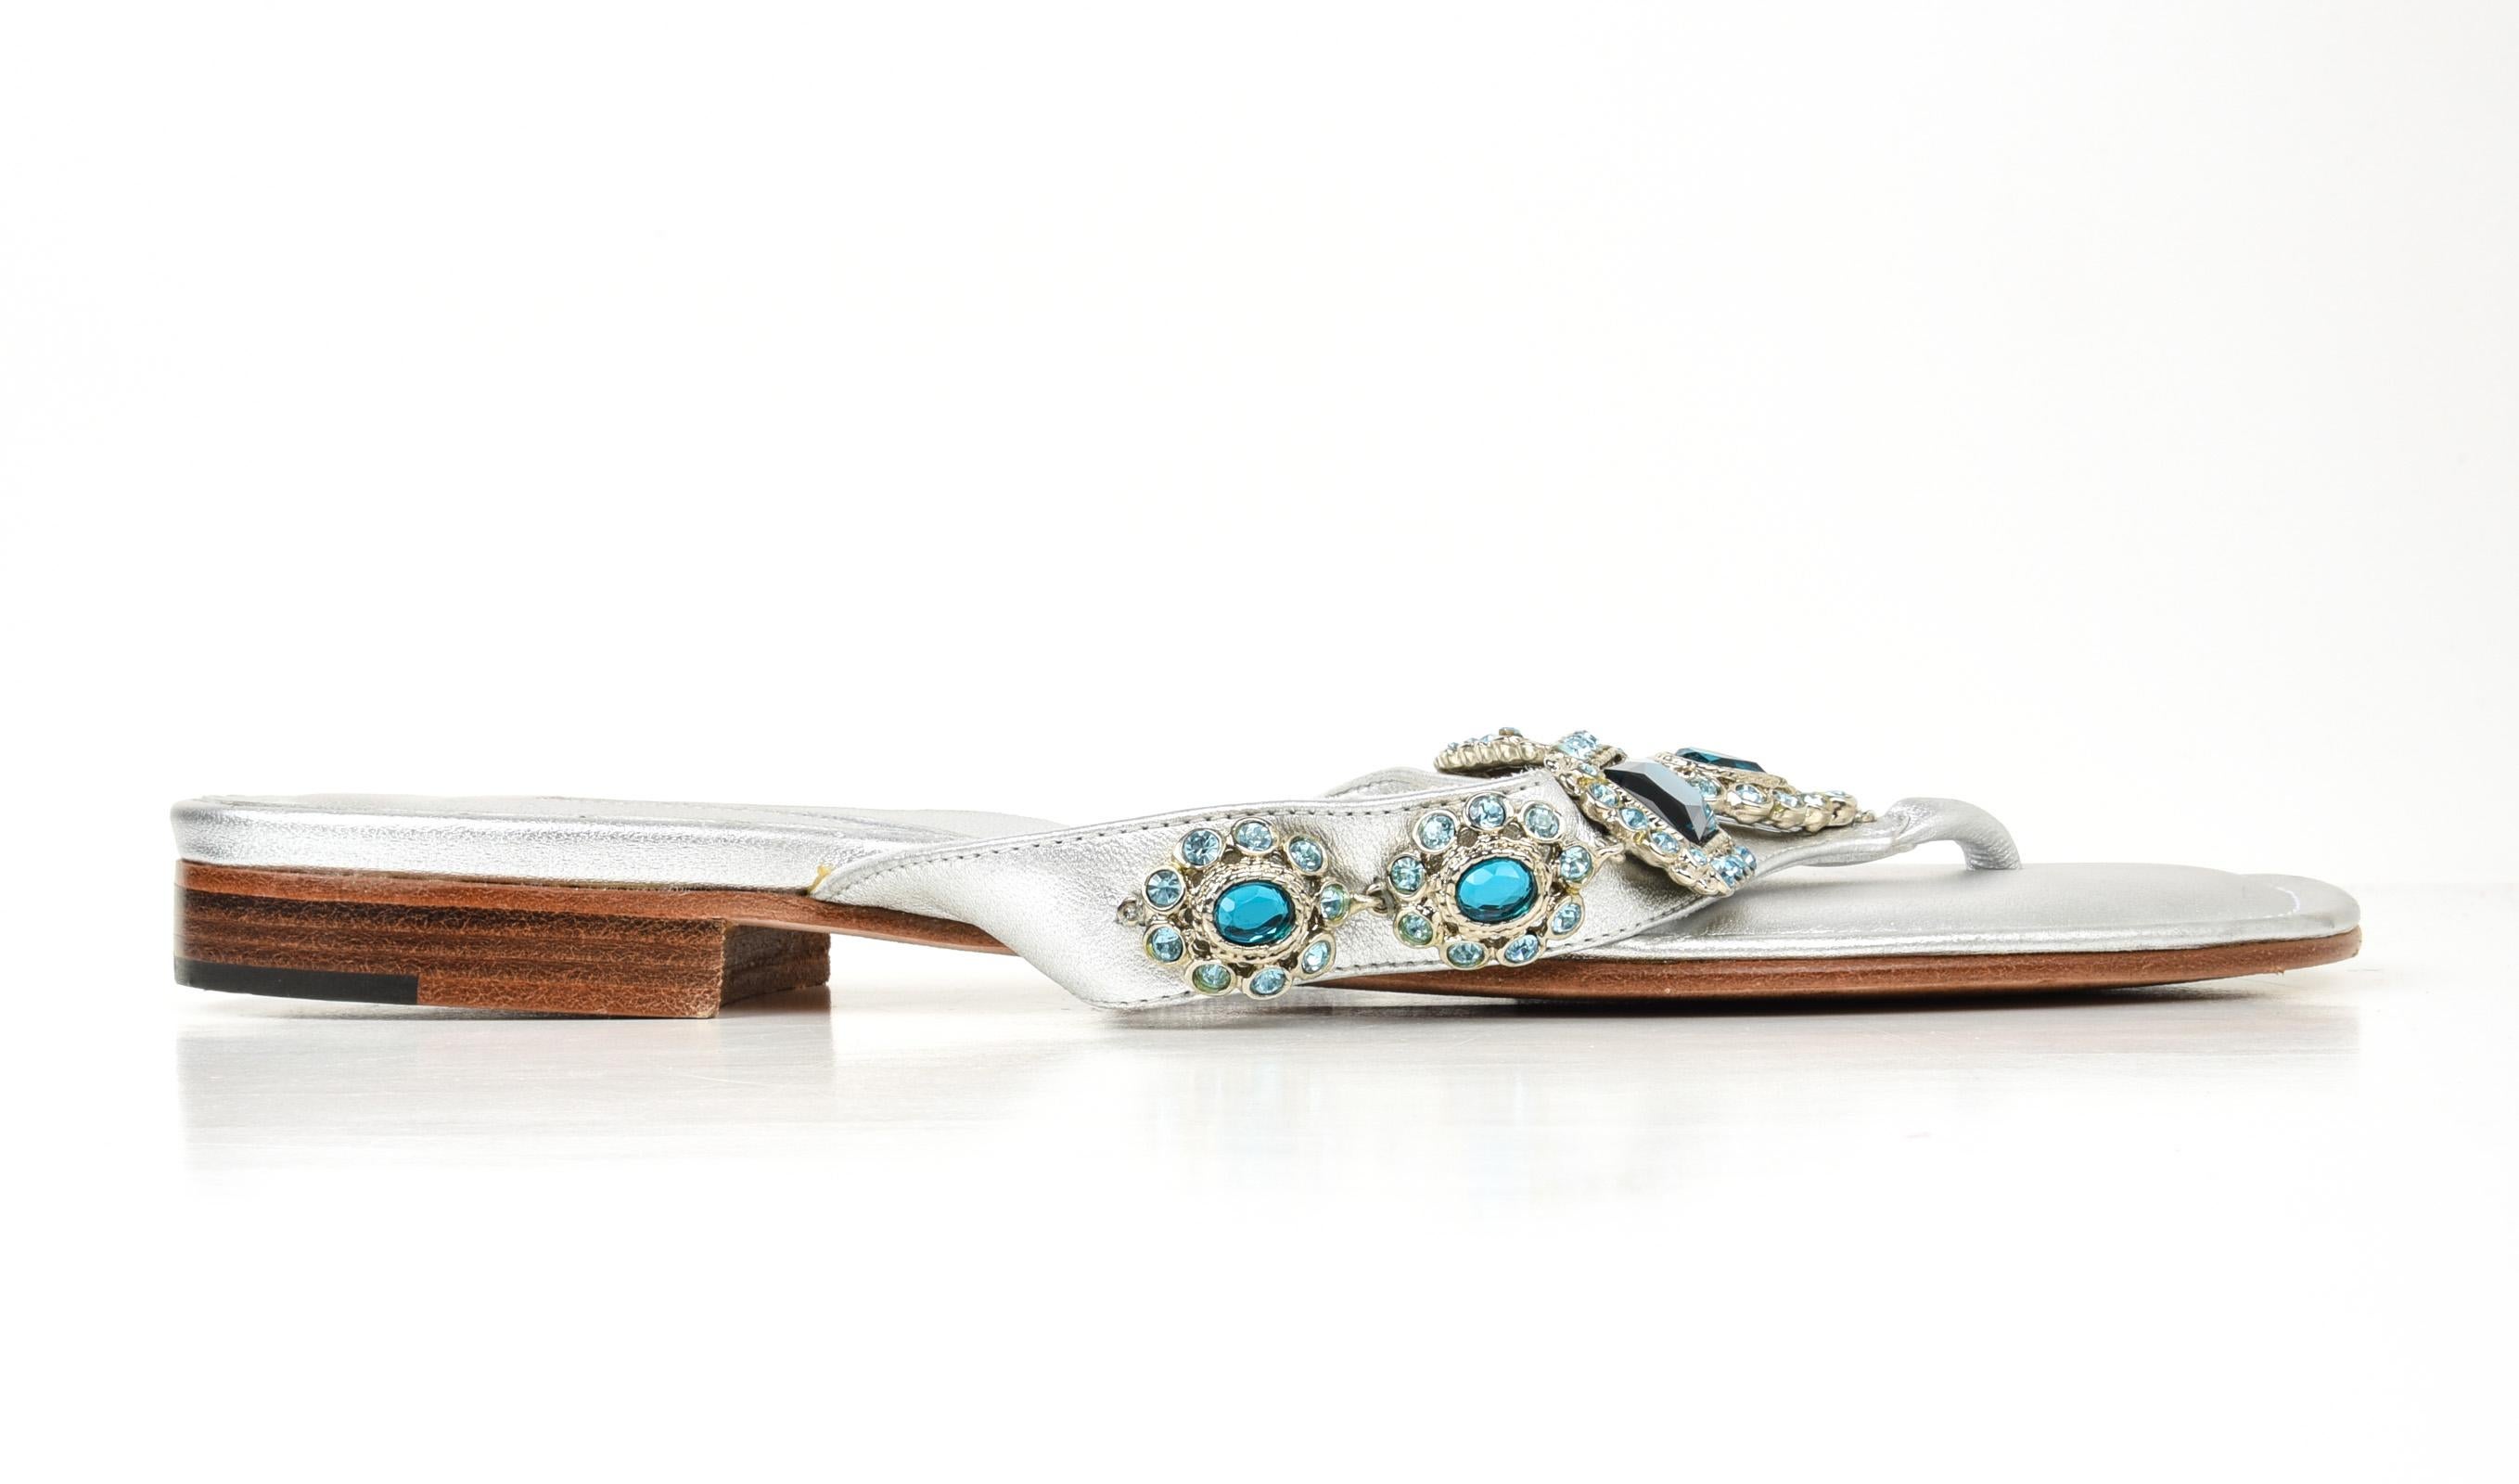 Guaranteed  authentic Manolo Blahnik silver leather thong flat sandal. 
Perfect summer sandal with aqua diamantes across strap.
Comes with sleeper.
  
SIZE  40
USA SIZE  10  
    
SHOE  MEASURES:
HEEL .75